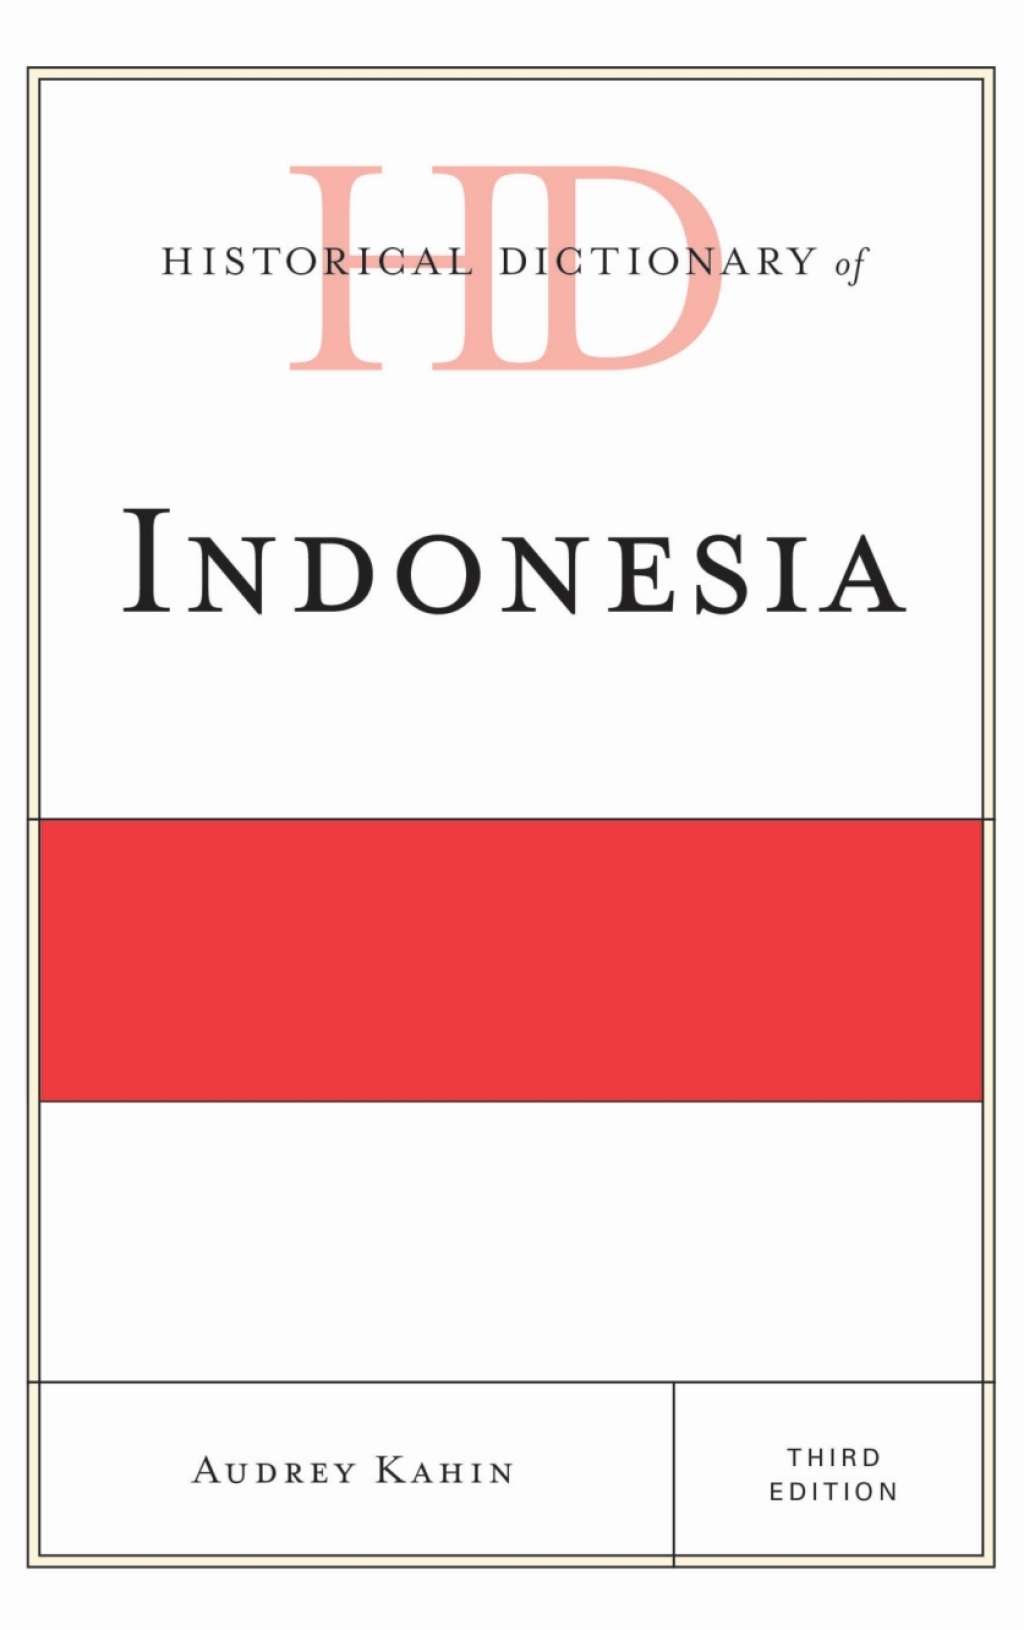 Historical Dictionary of Indonesia - 3rd Edition (eBook)